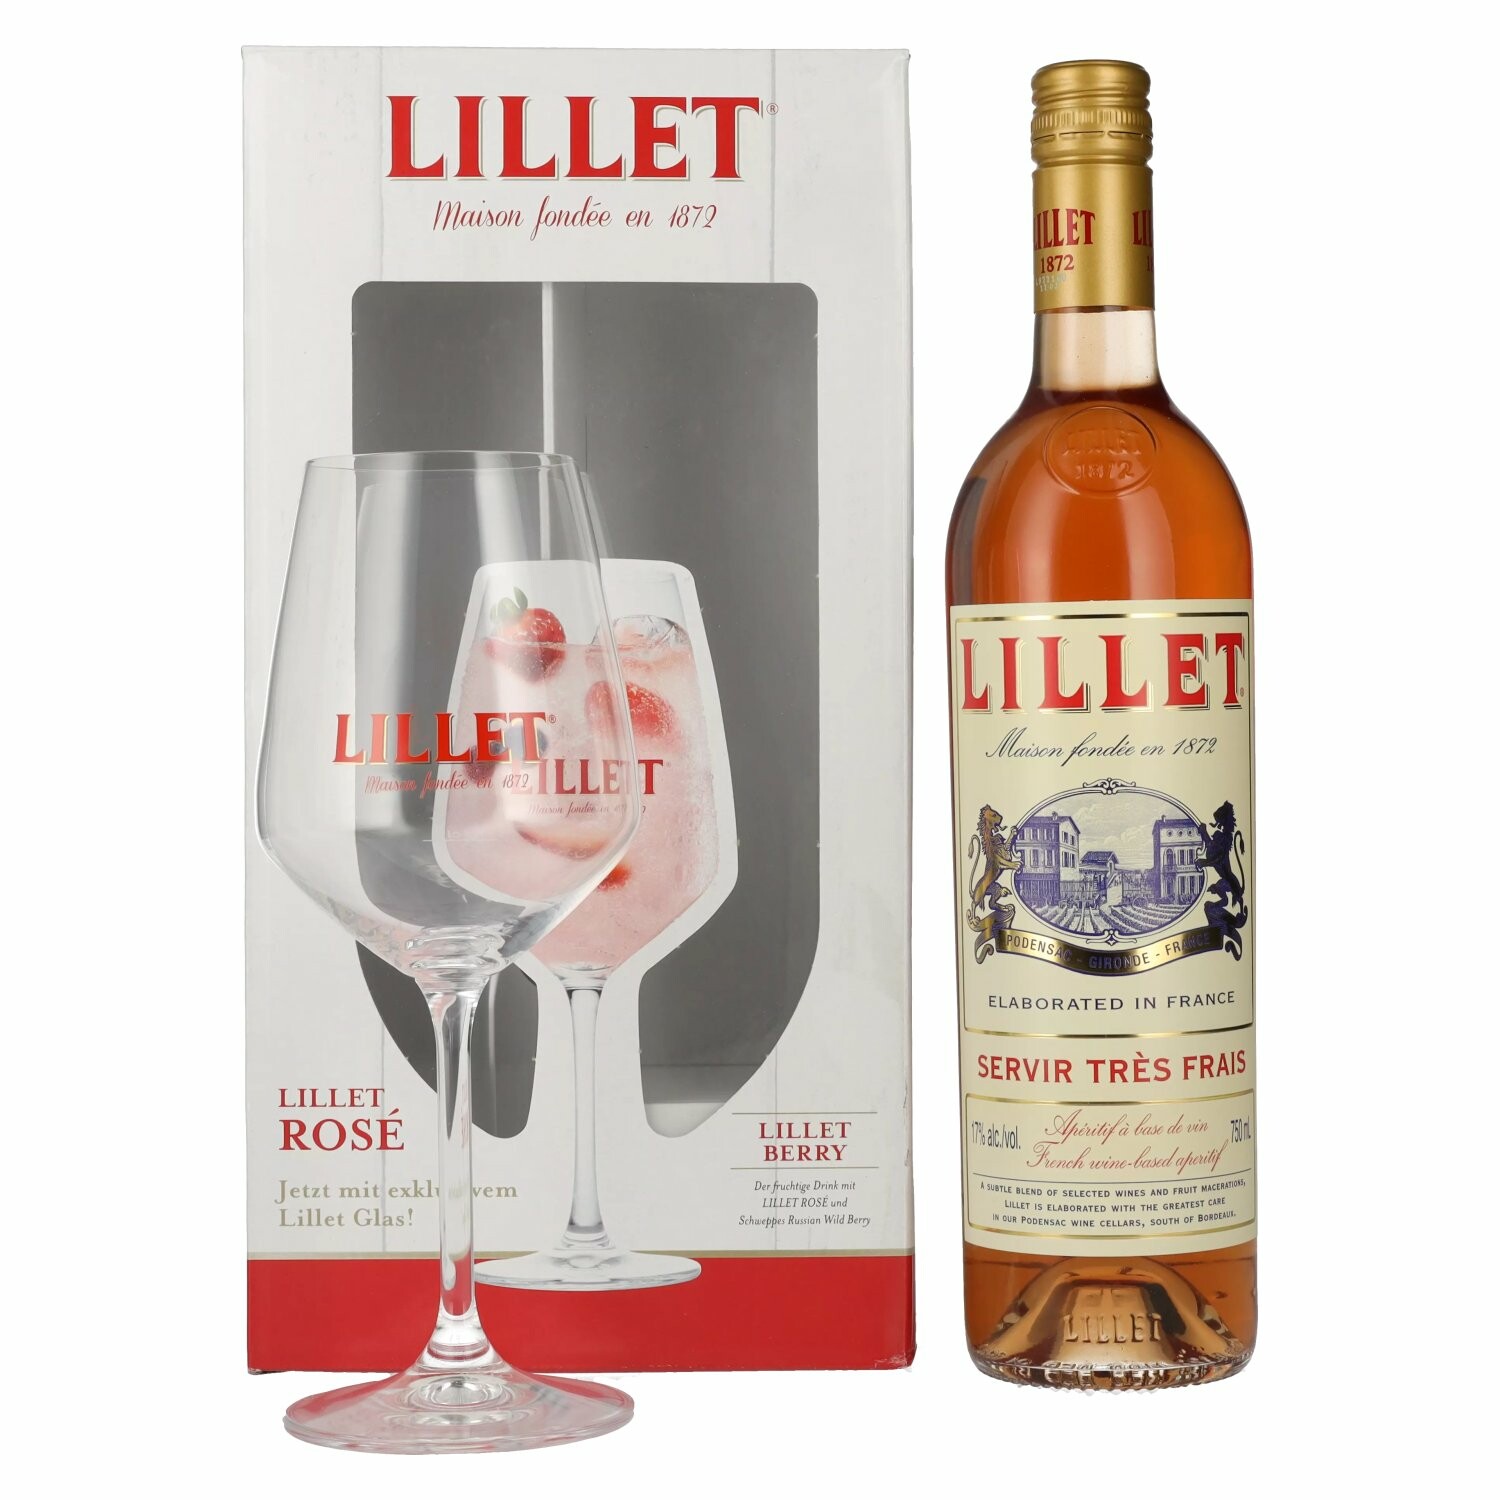 Lillet Rosé 17% Vol. 0,75l in Giftbox with glass